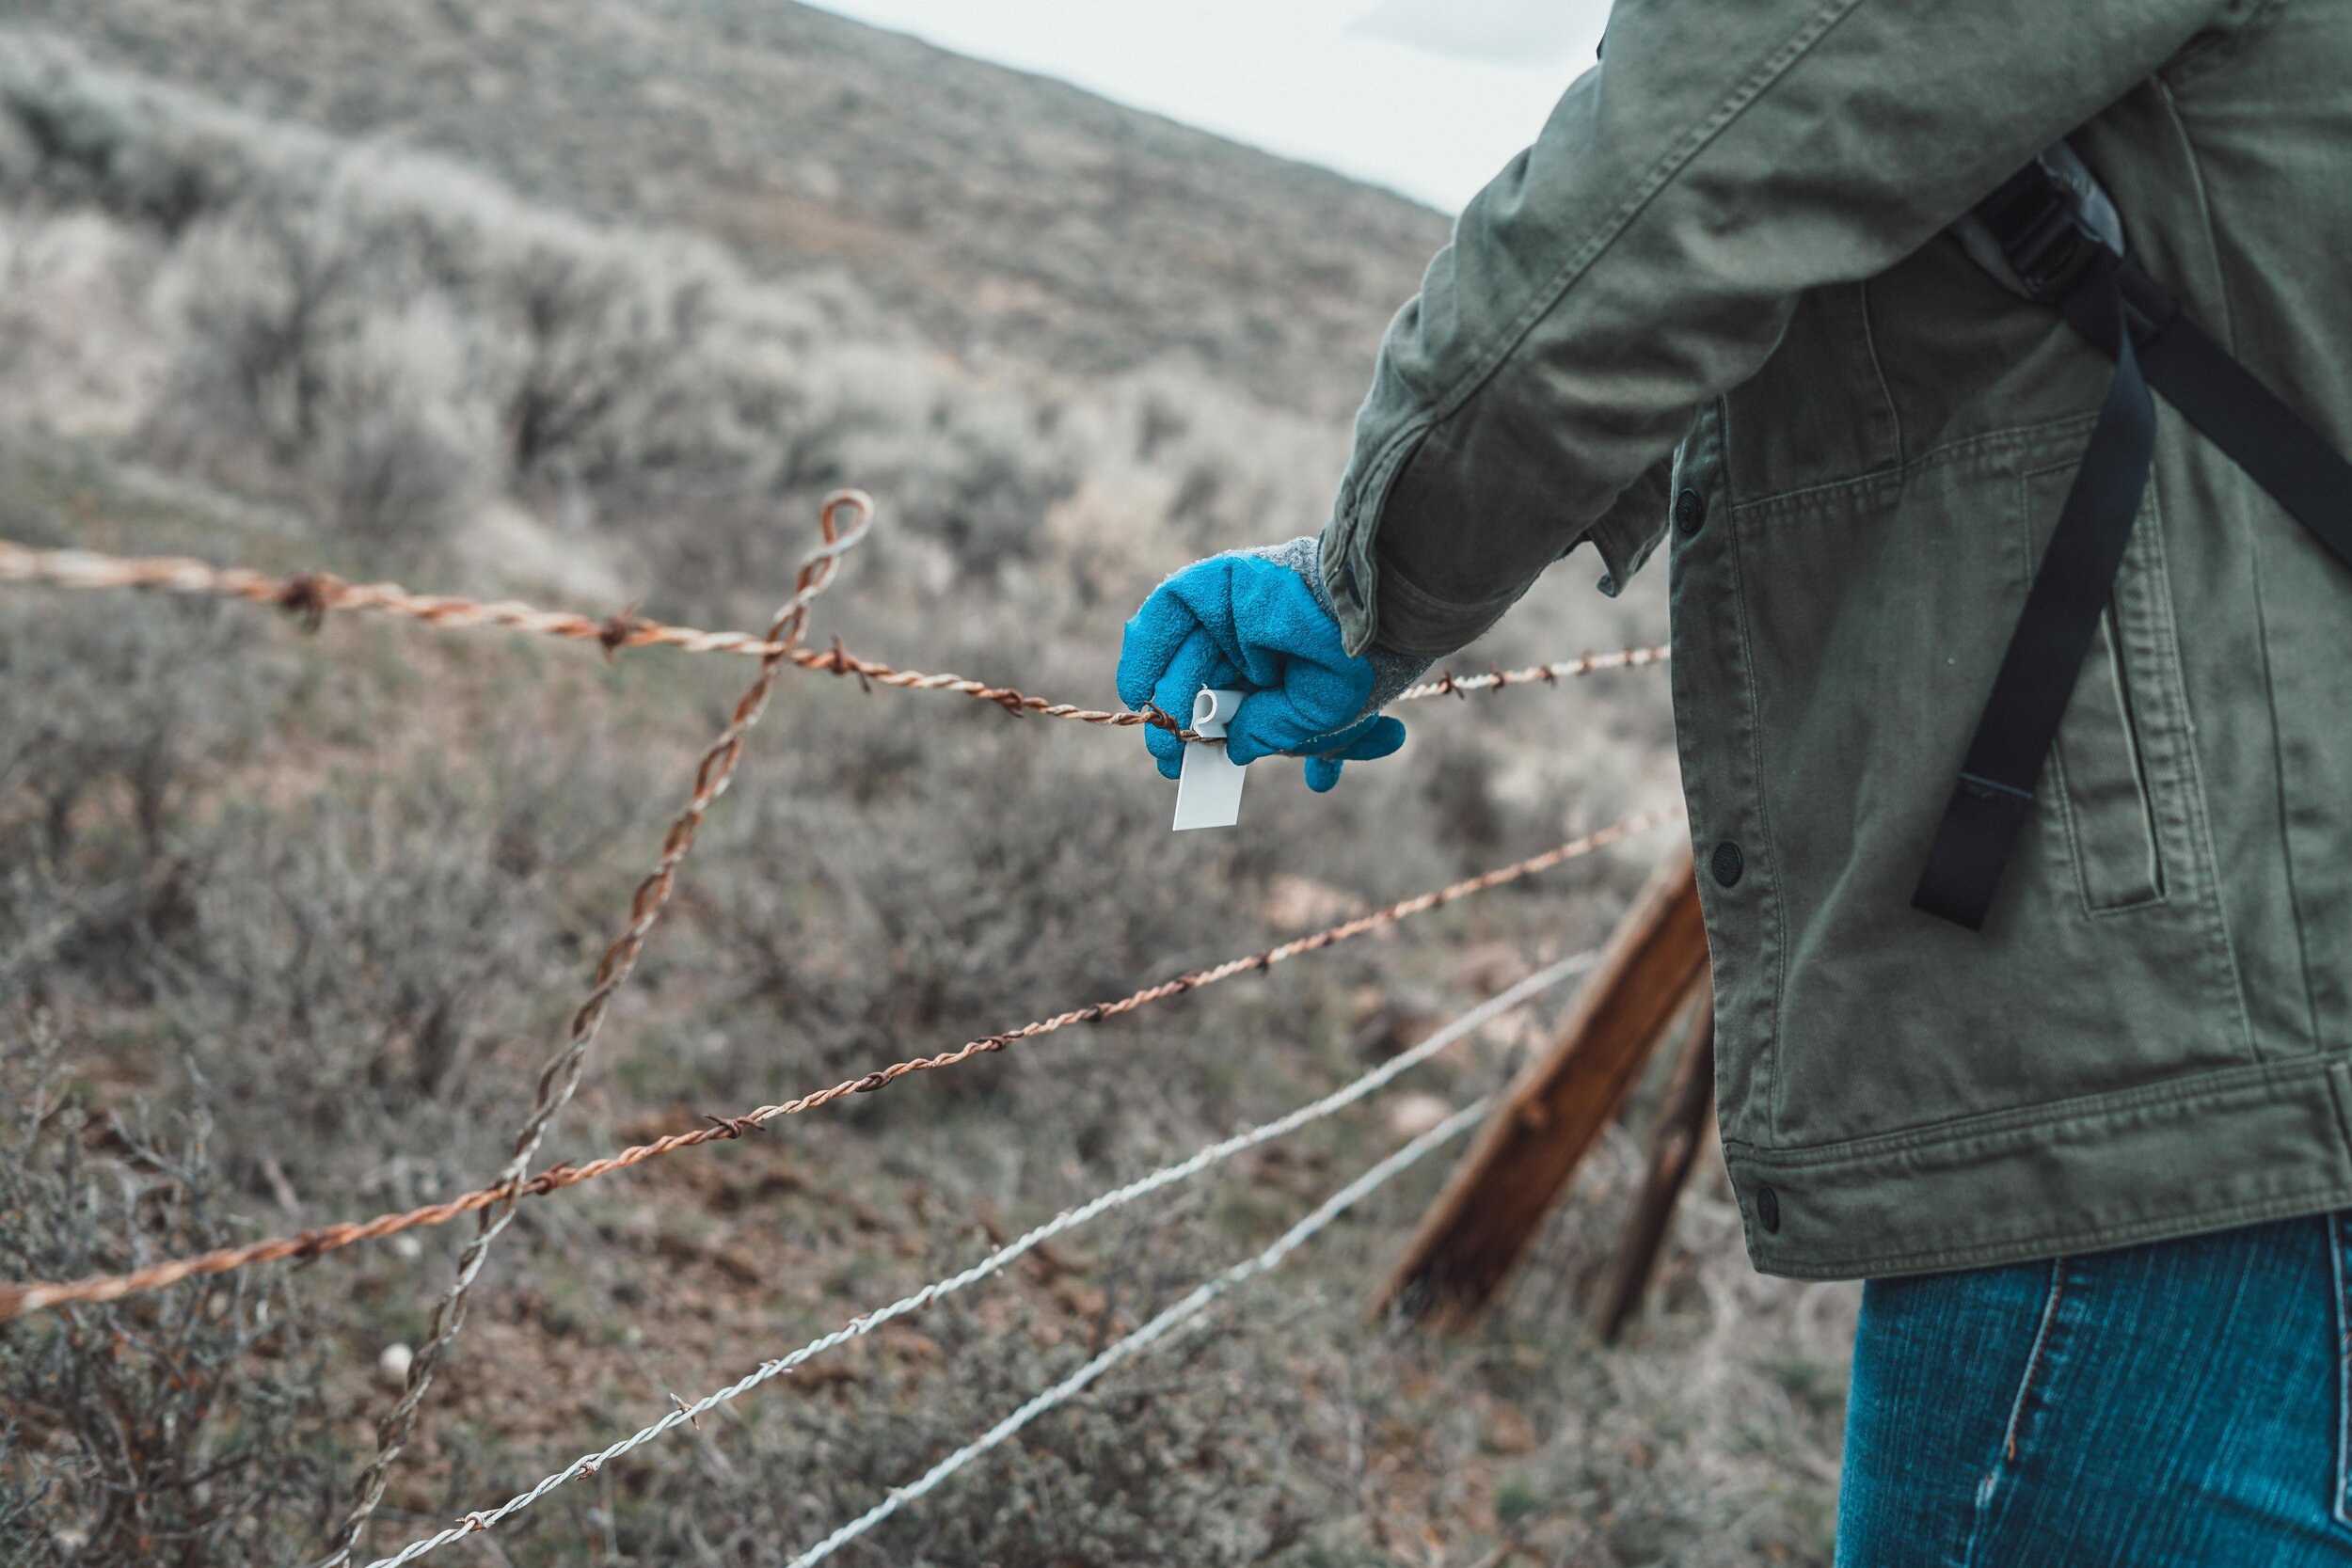  Tagging fencing for Sage grouse safety in Moses Coulee. Photo by Courtney Baxter. 